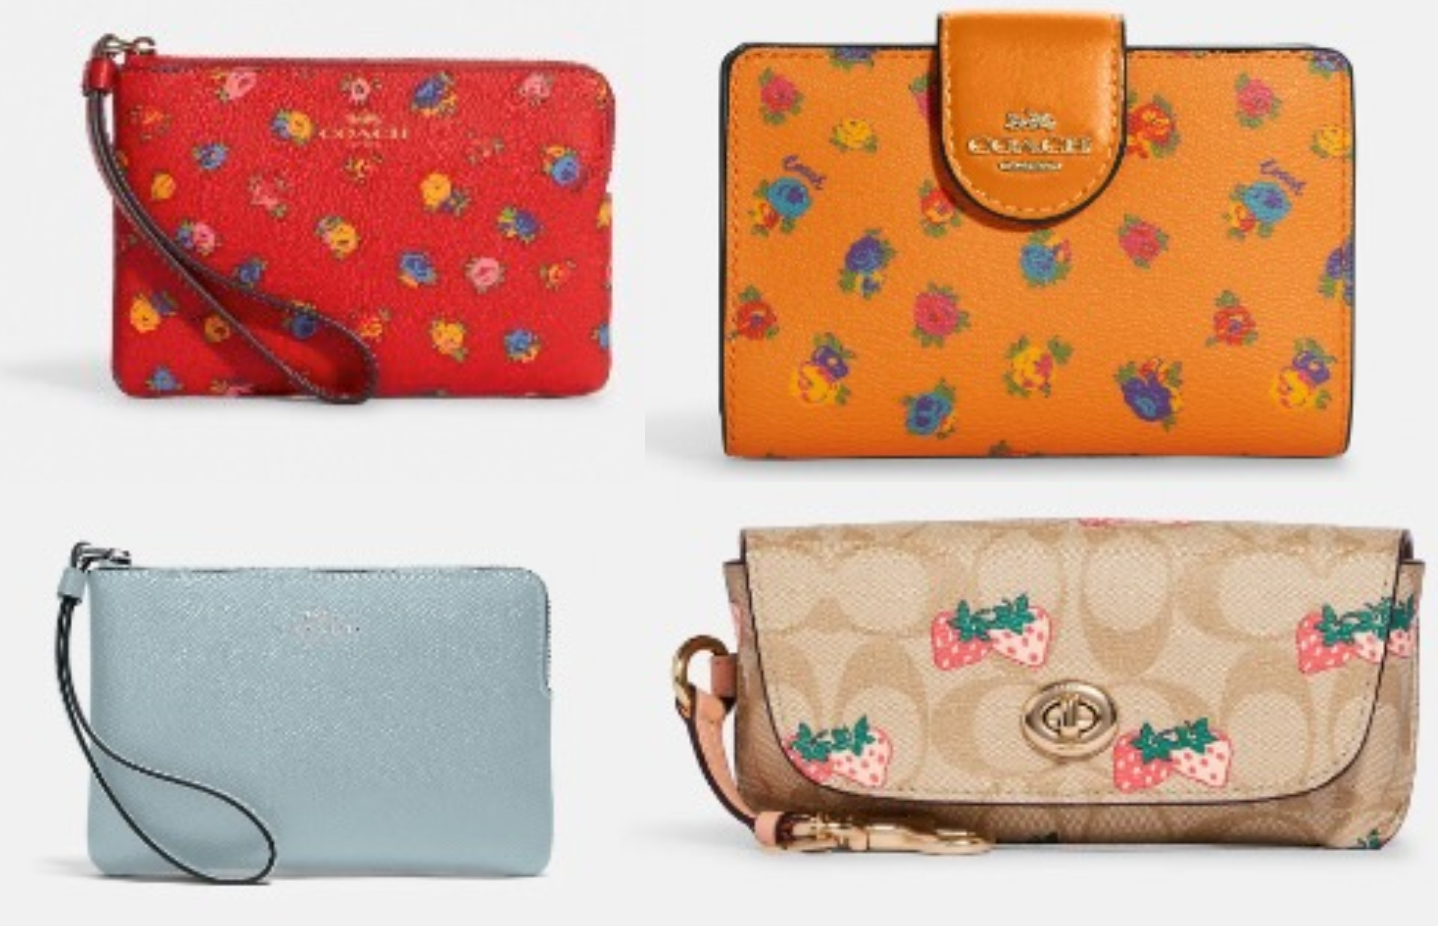 Holiday handbag deal: Save up to 70% off Coach Outlet today - CNET